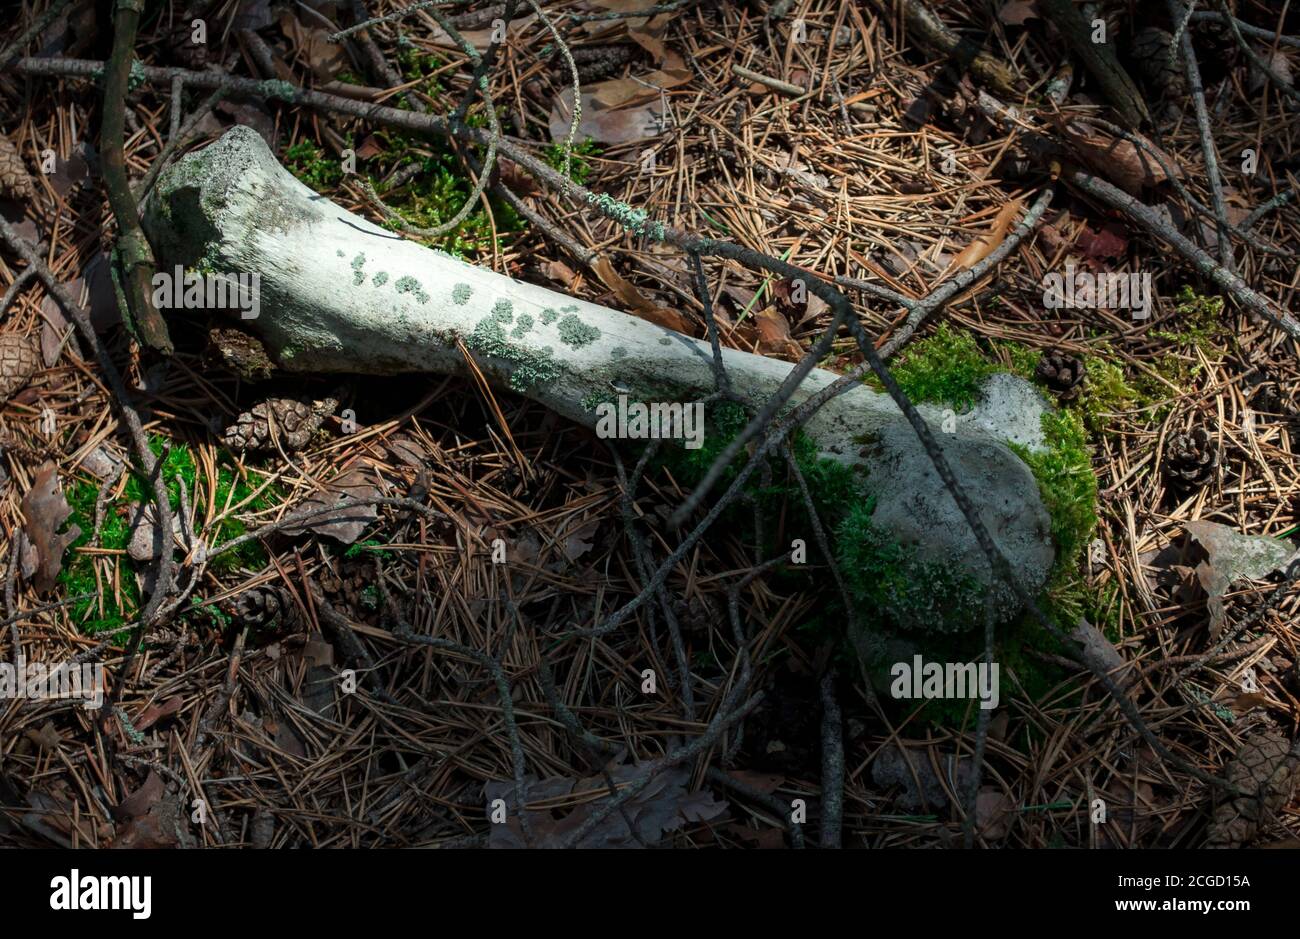 Big bone of an animal overgrown with moss and lying on a pine-covered forest floor, close up Stock Photo